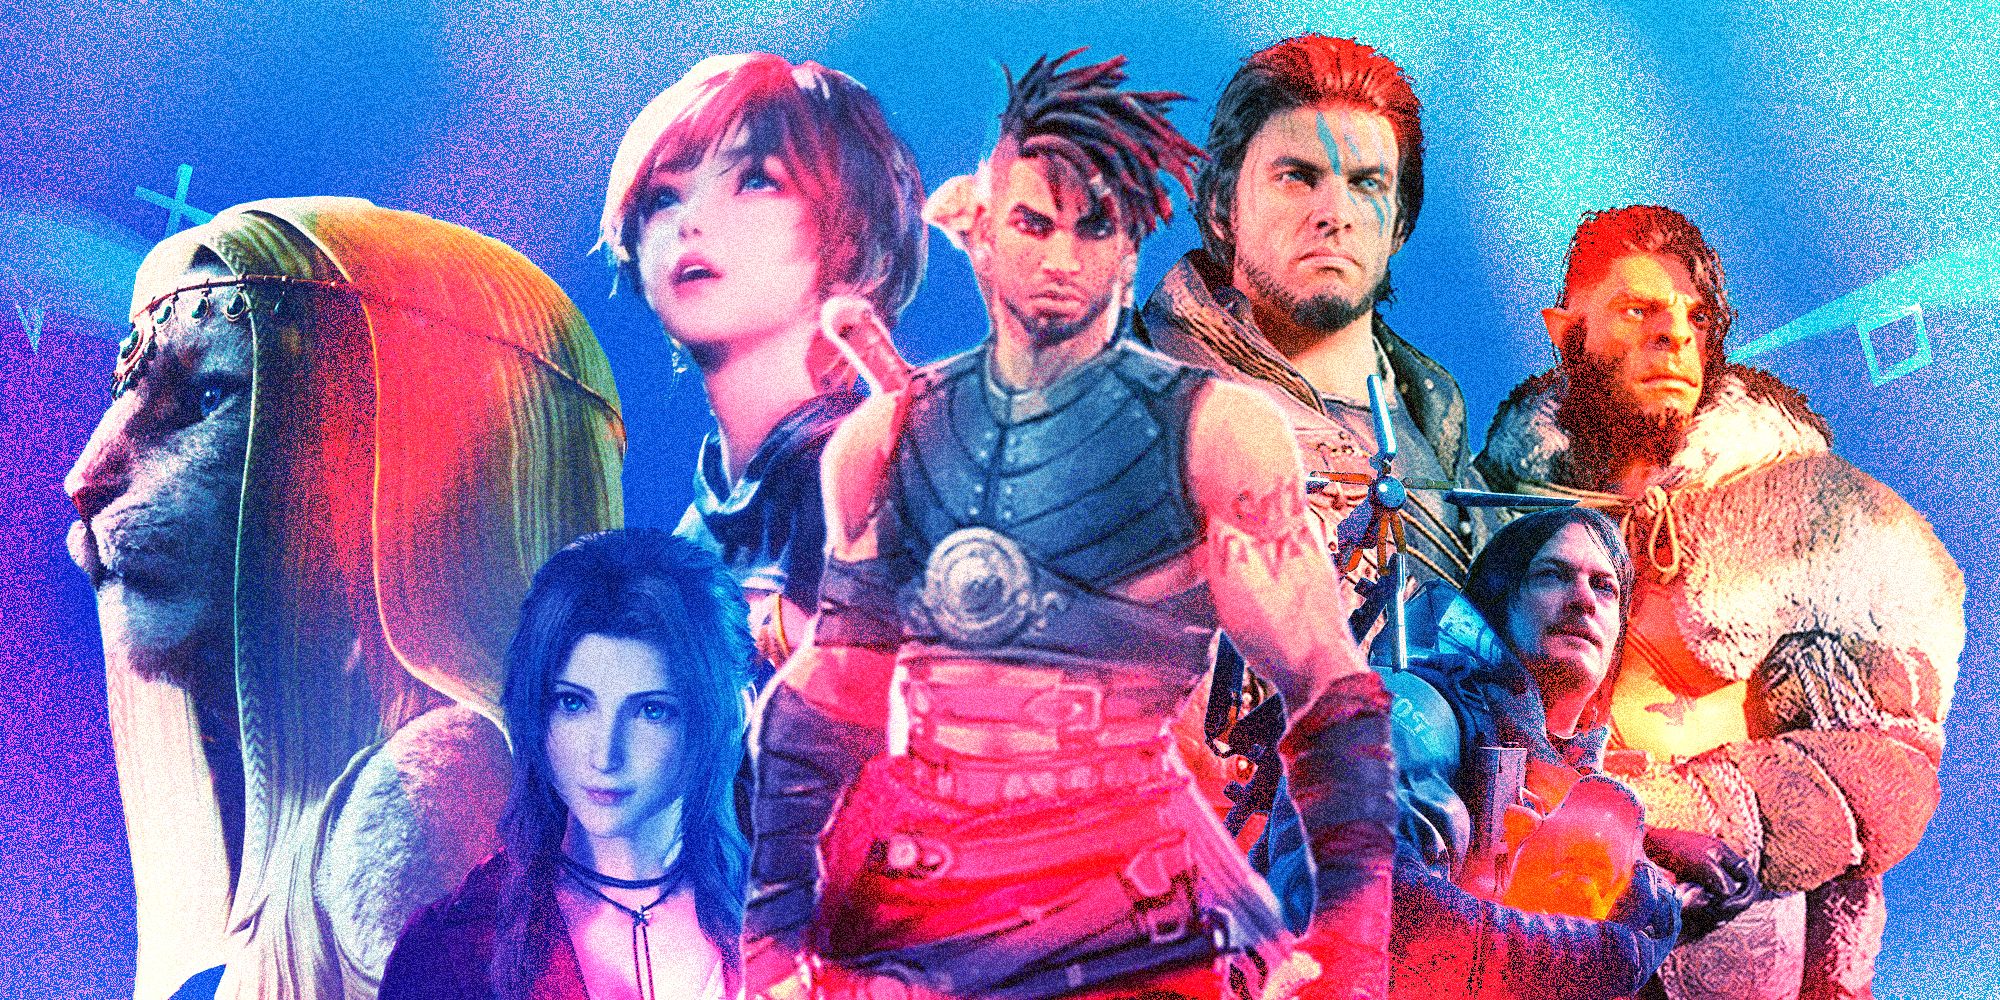 Upcoming PS5 games: New PS5 games for 2024 and beyond